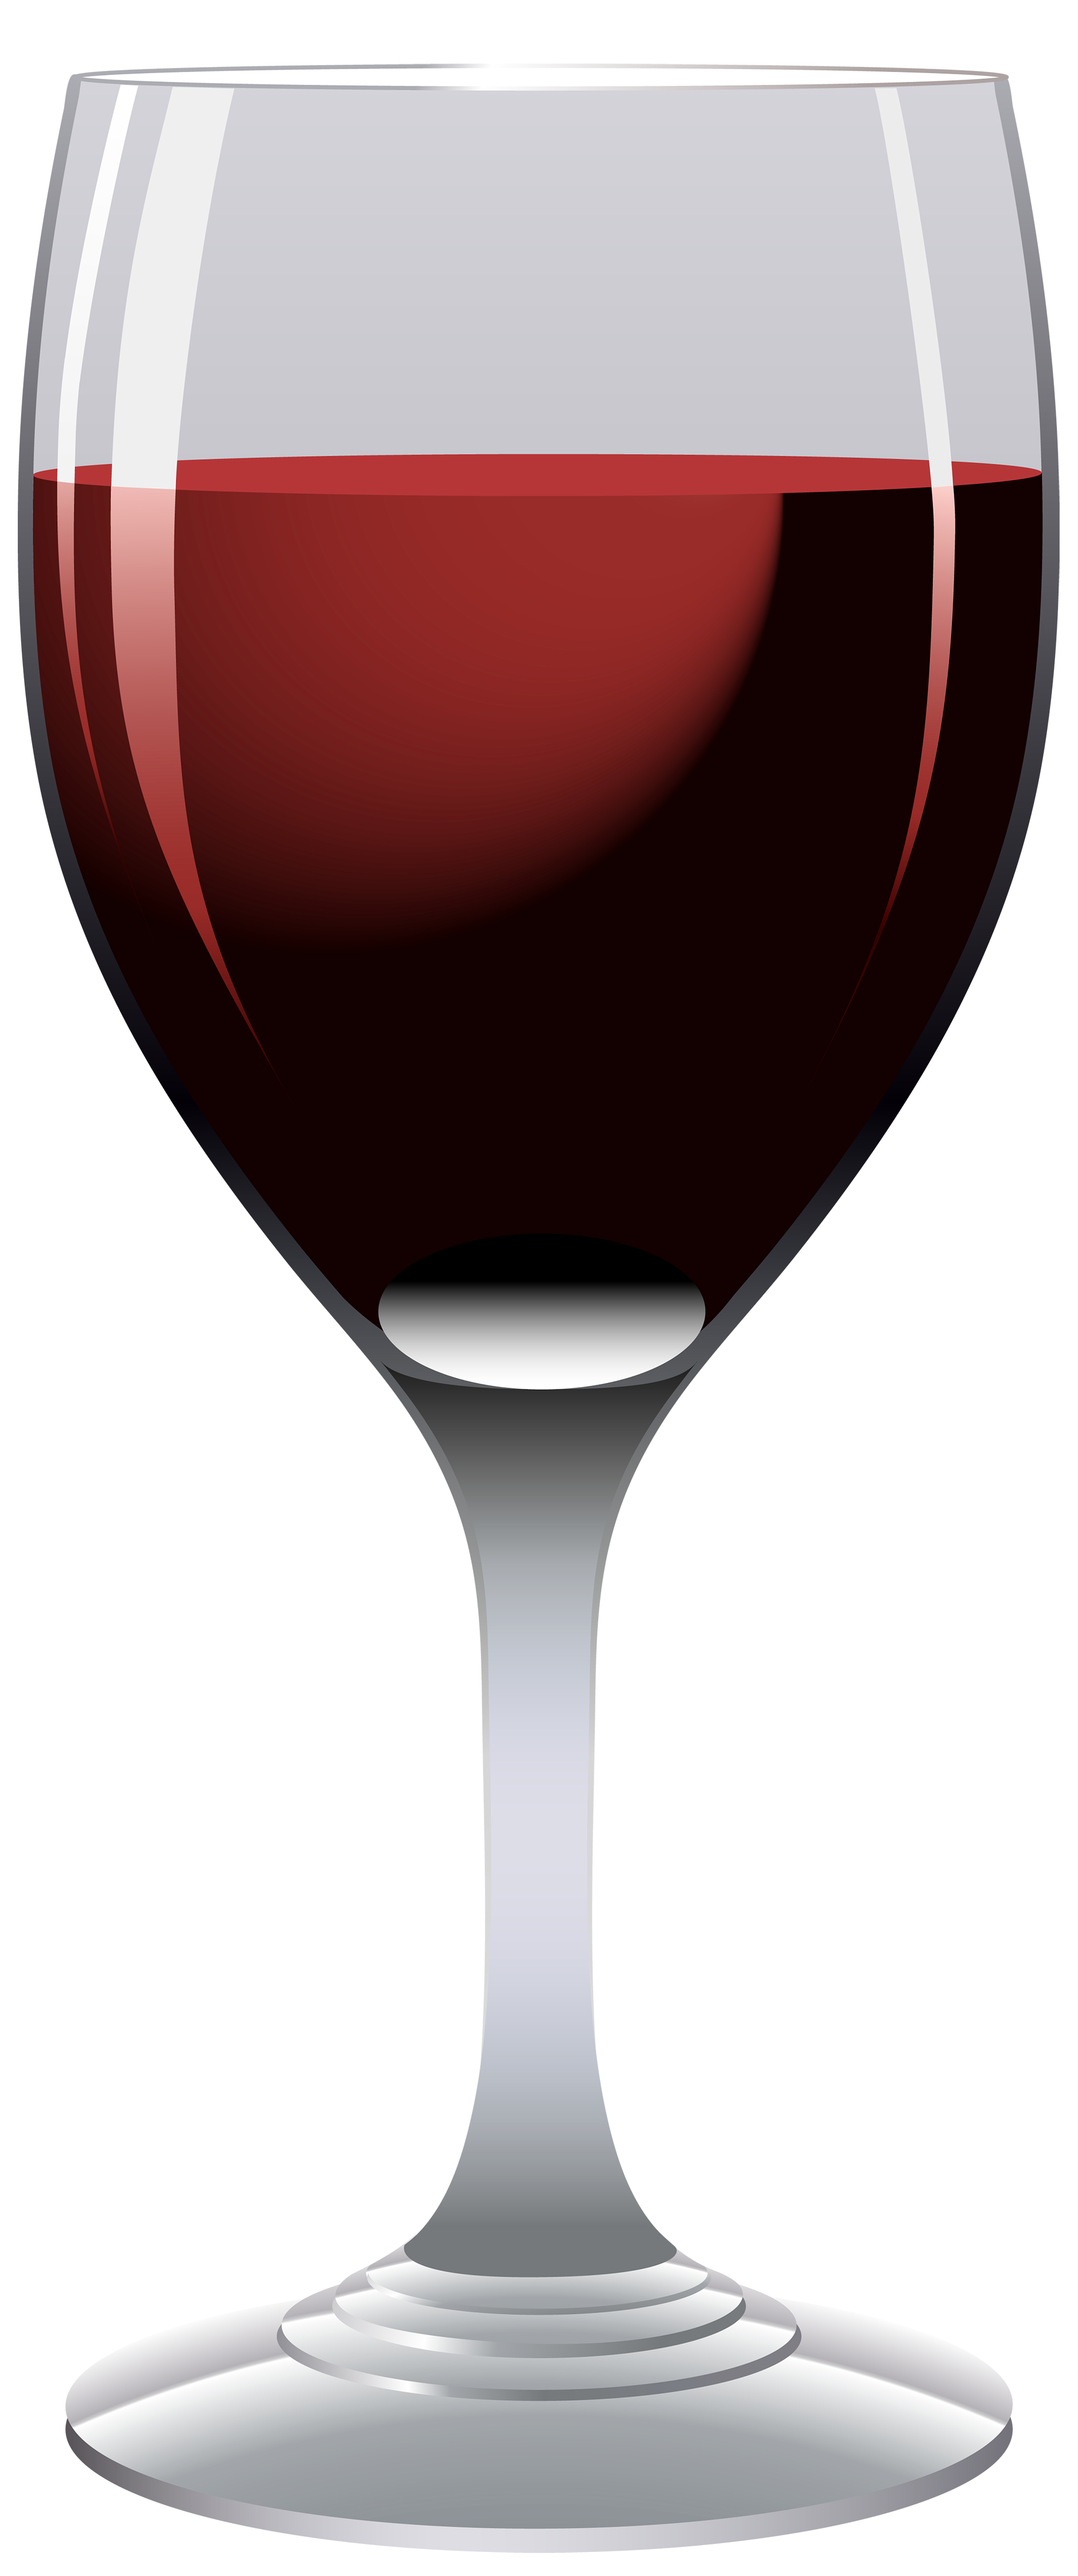 Free clip art wine glasses free vector for download about 2